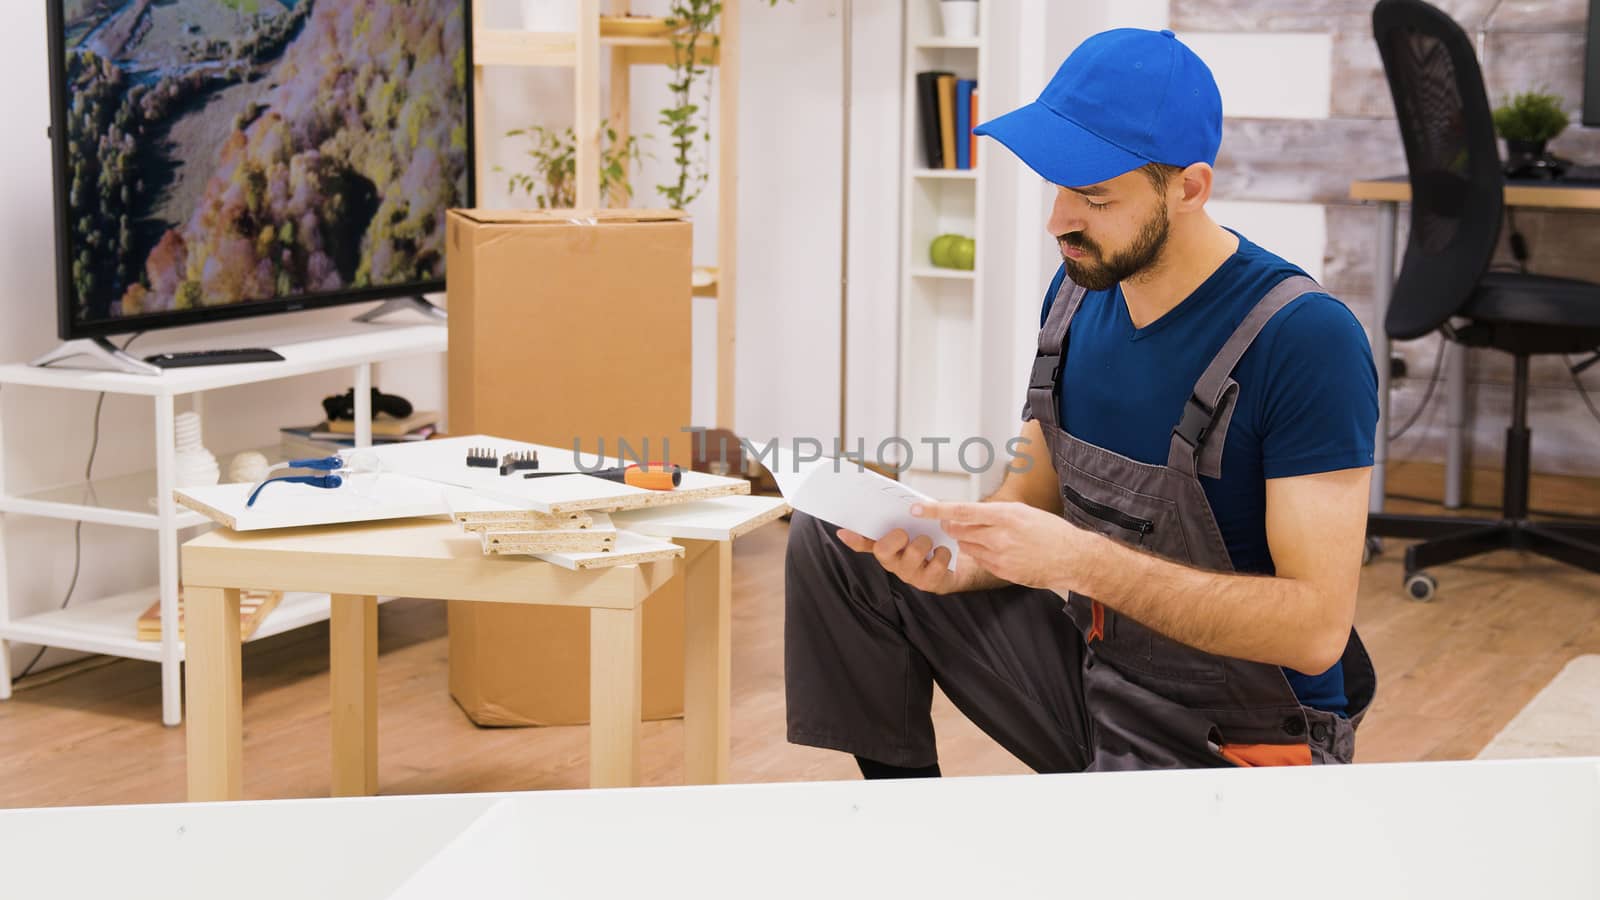 Professional furniture assembly worker checking position of the shelf. Worker follows instruction.